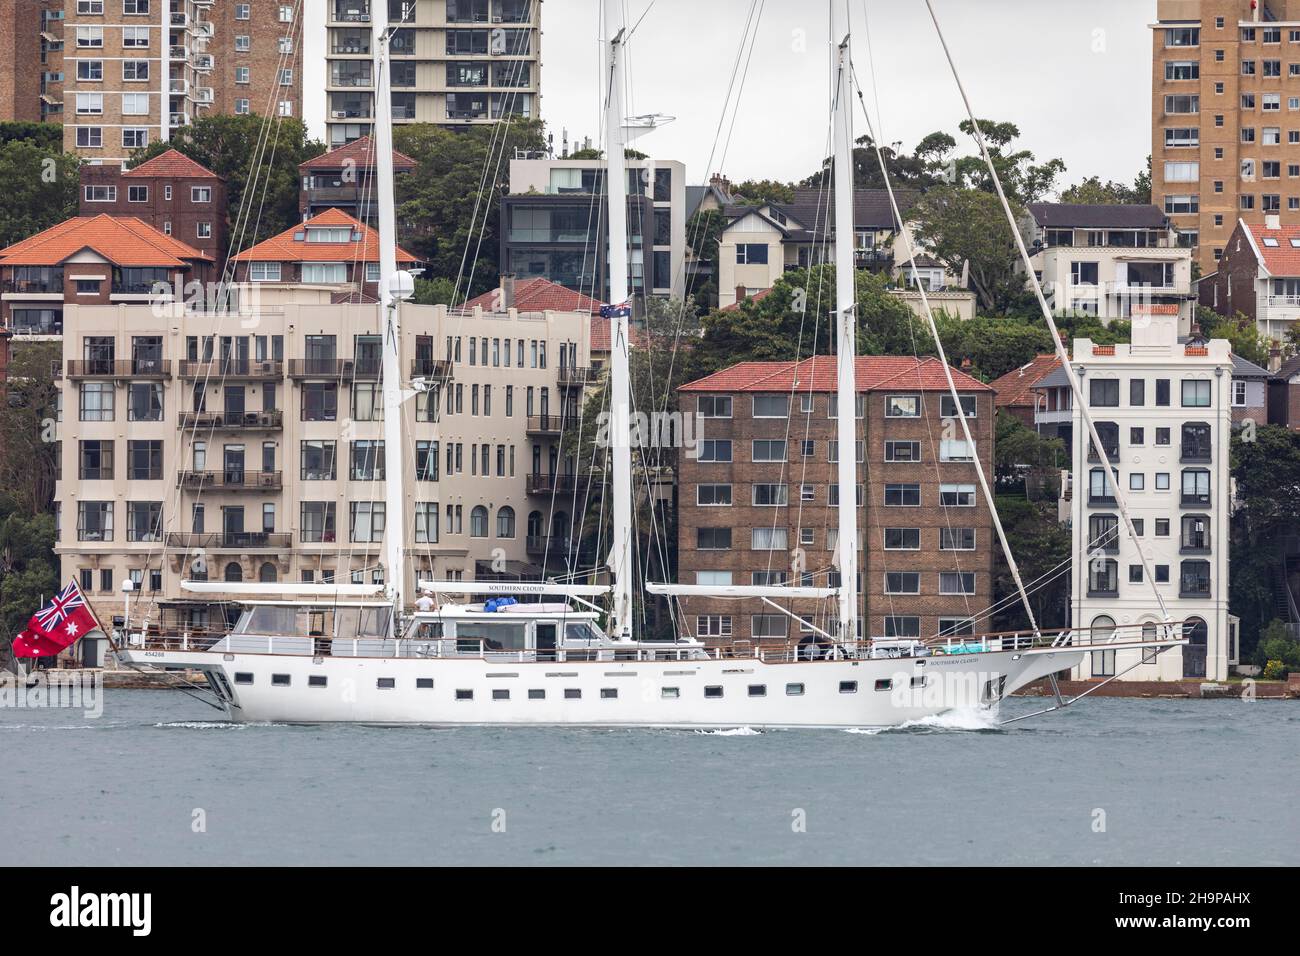 Southern Cloud yacht, a three masted Bermuda rigged schooner on Sydney Harbour under power,Sydney harbour,NSW,Australia Stock Photo